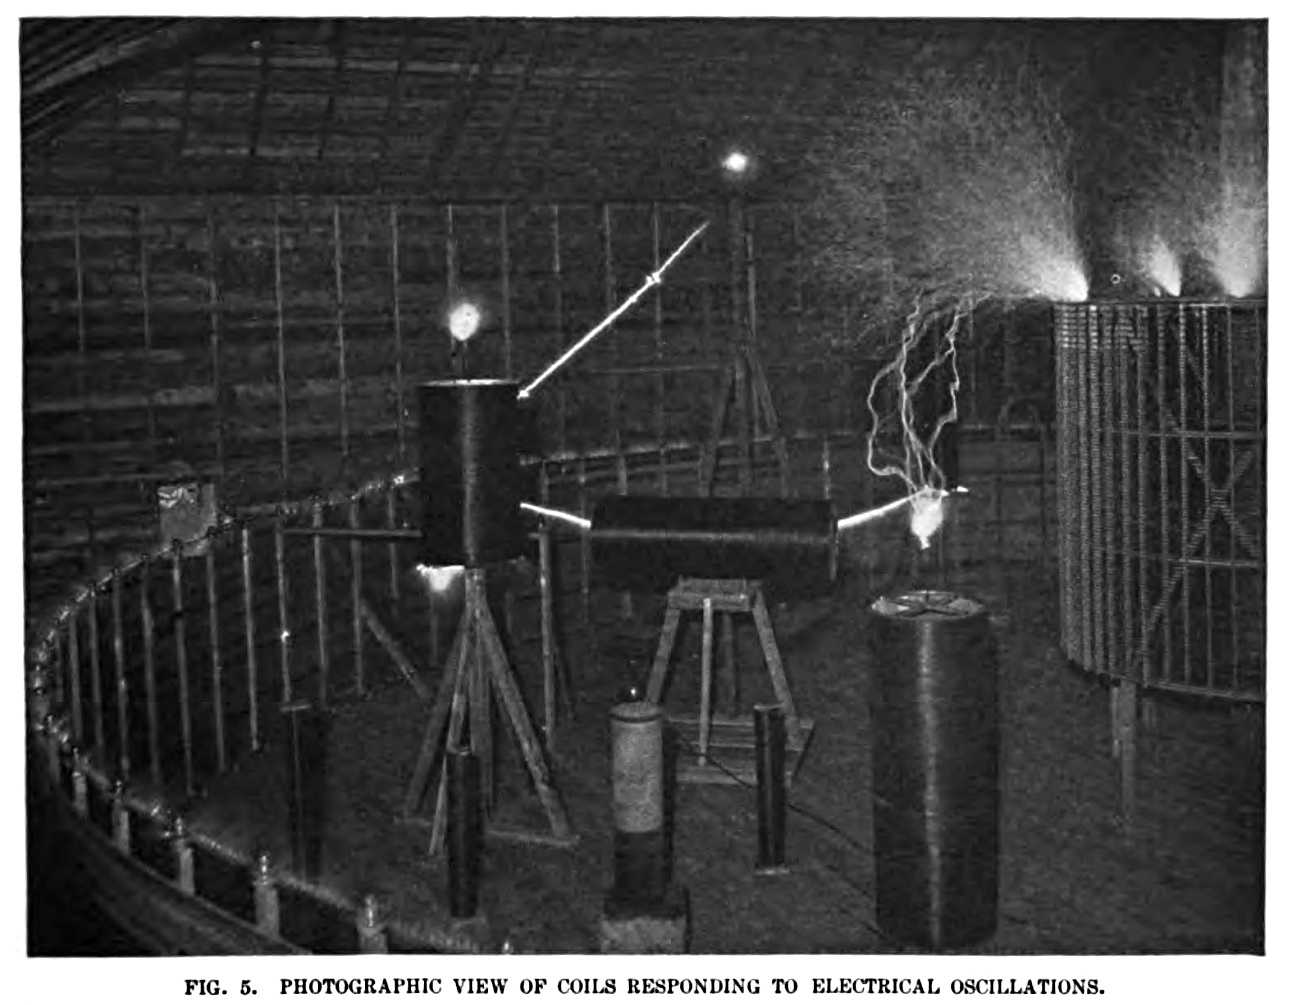 FIG. 5. Photographic view of coils responding to electrical oscillations. The picture shows a number of coils, differently attuned and responding to the vibrations transmitted to them through the earth from an electrical oscillator. The large coil on the right, discharging strongly, is tuned to the fundamental vibration, which is fifty thousand per second; the two larger vertical coils to twice that number; the smaller white wire coil to four times that number; and the remaining small coils to higher tones. The vibrations produced by the oscillator were so intense that they affected perceptibly a small coil tuned to the twenty-sixth higher tone.